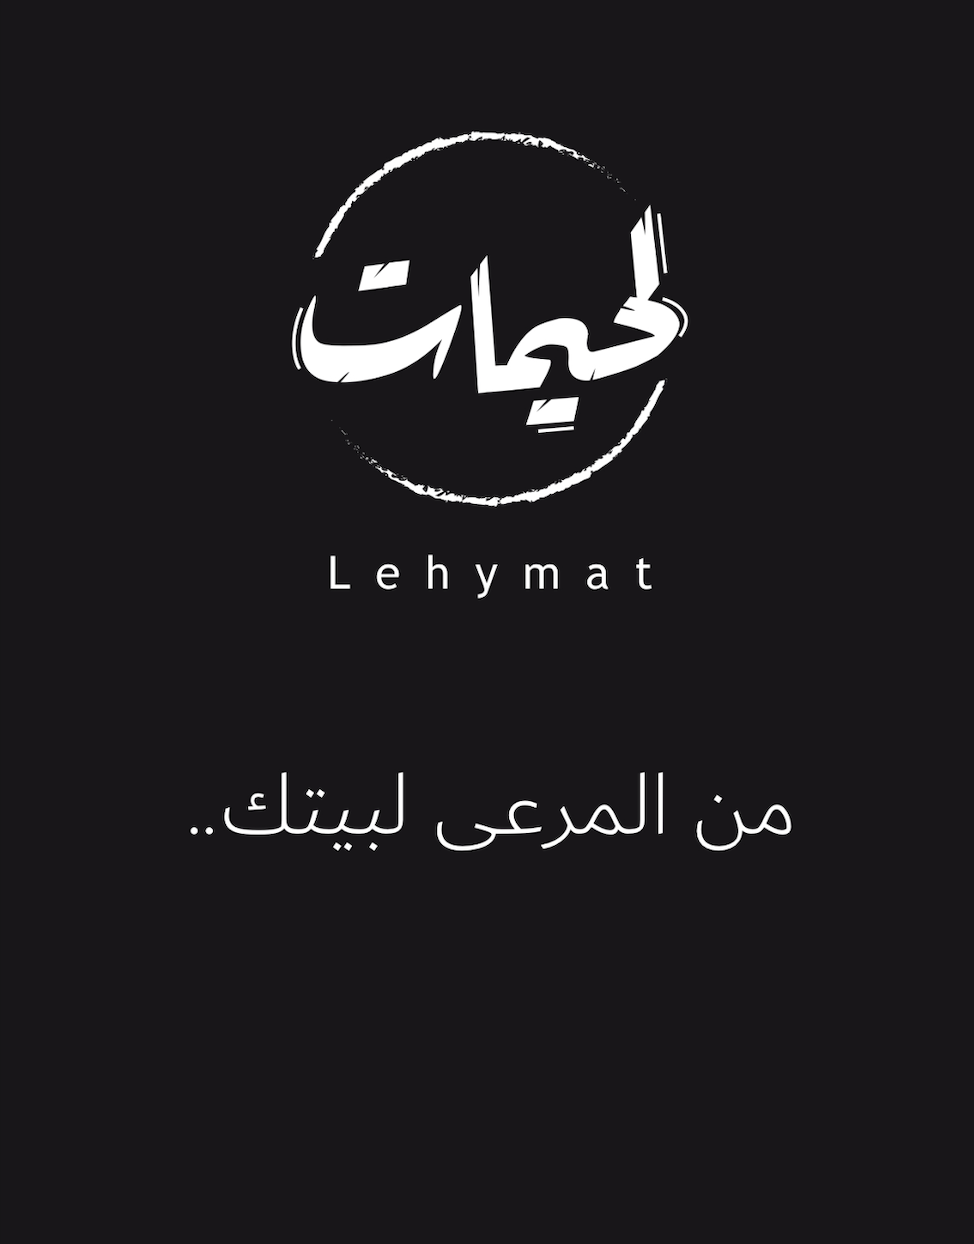 High-quality meats for your cooking needs - only at Lahaimat